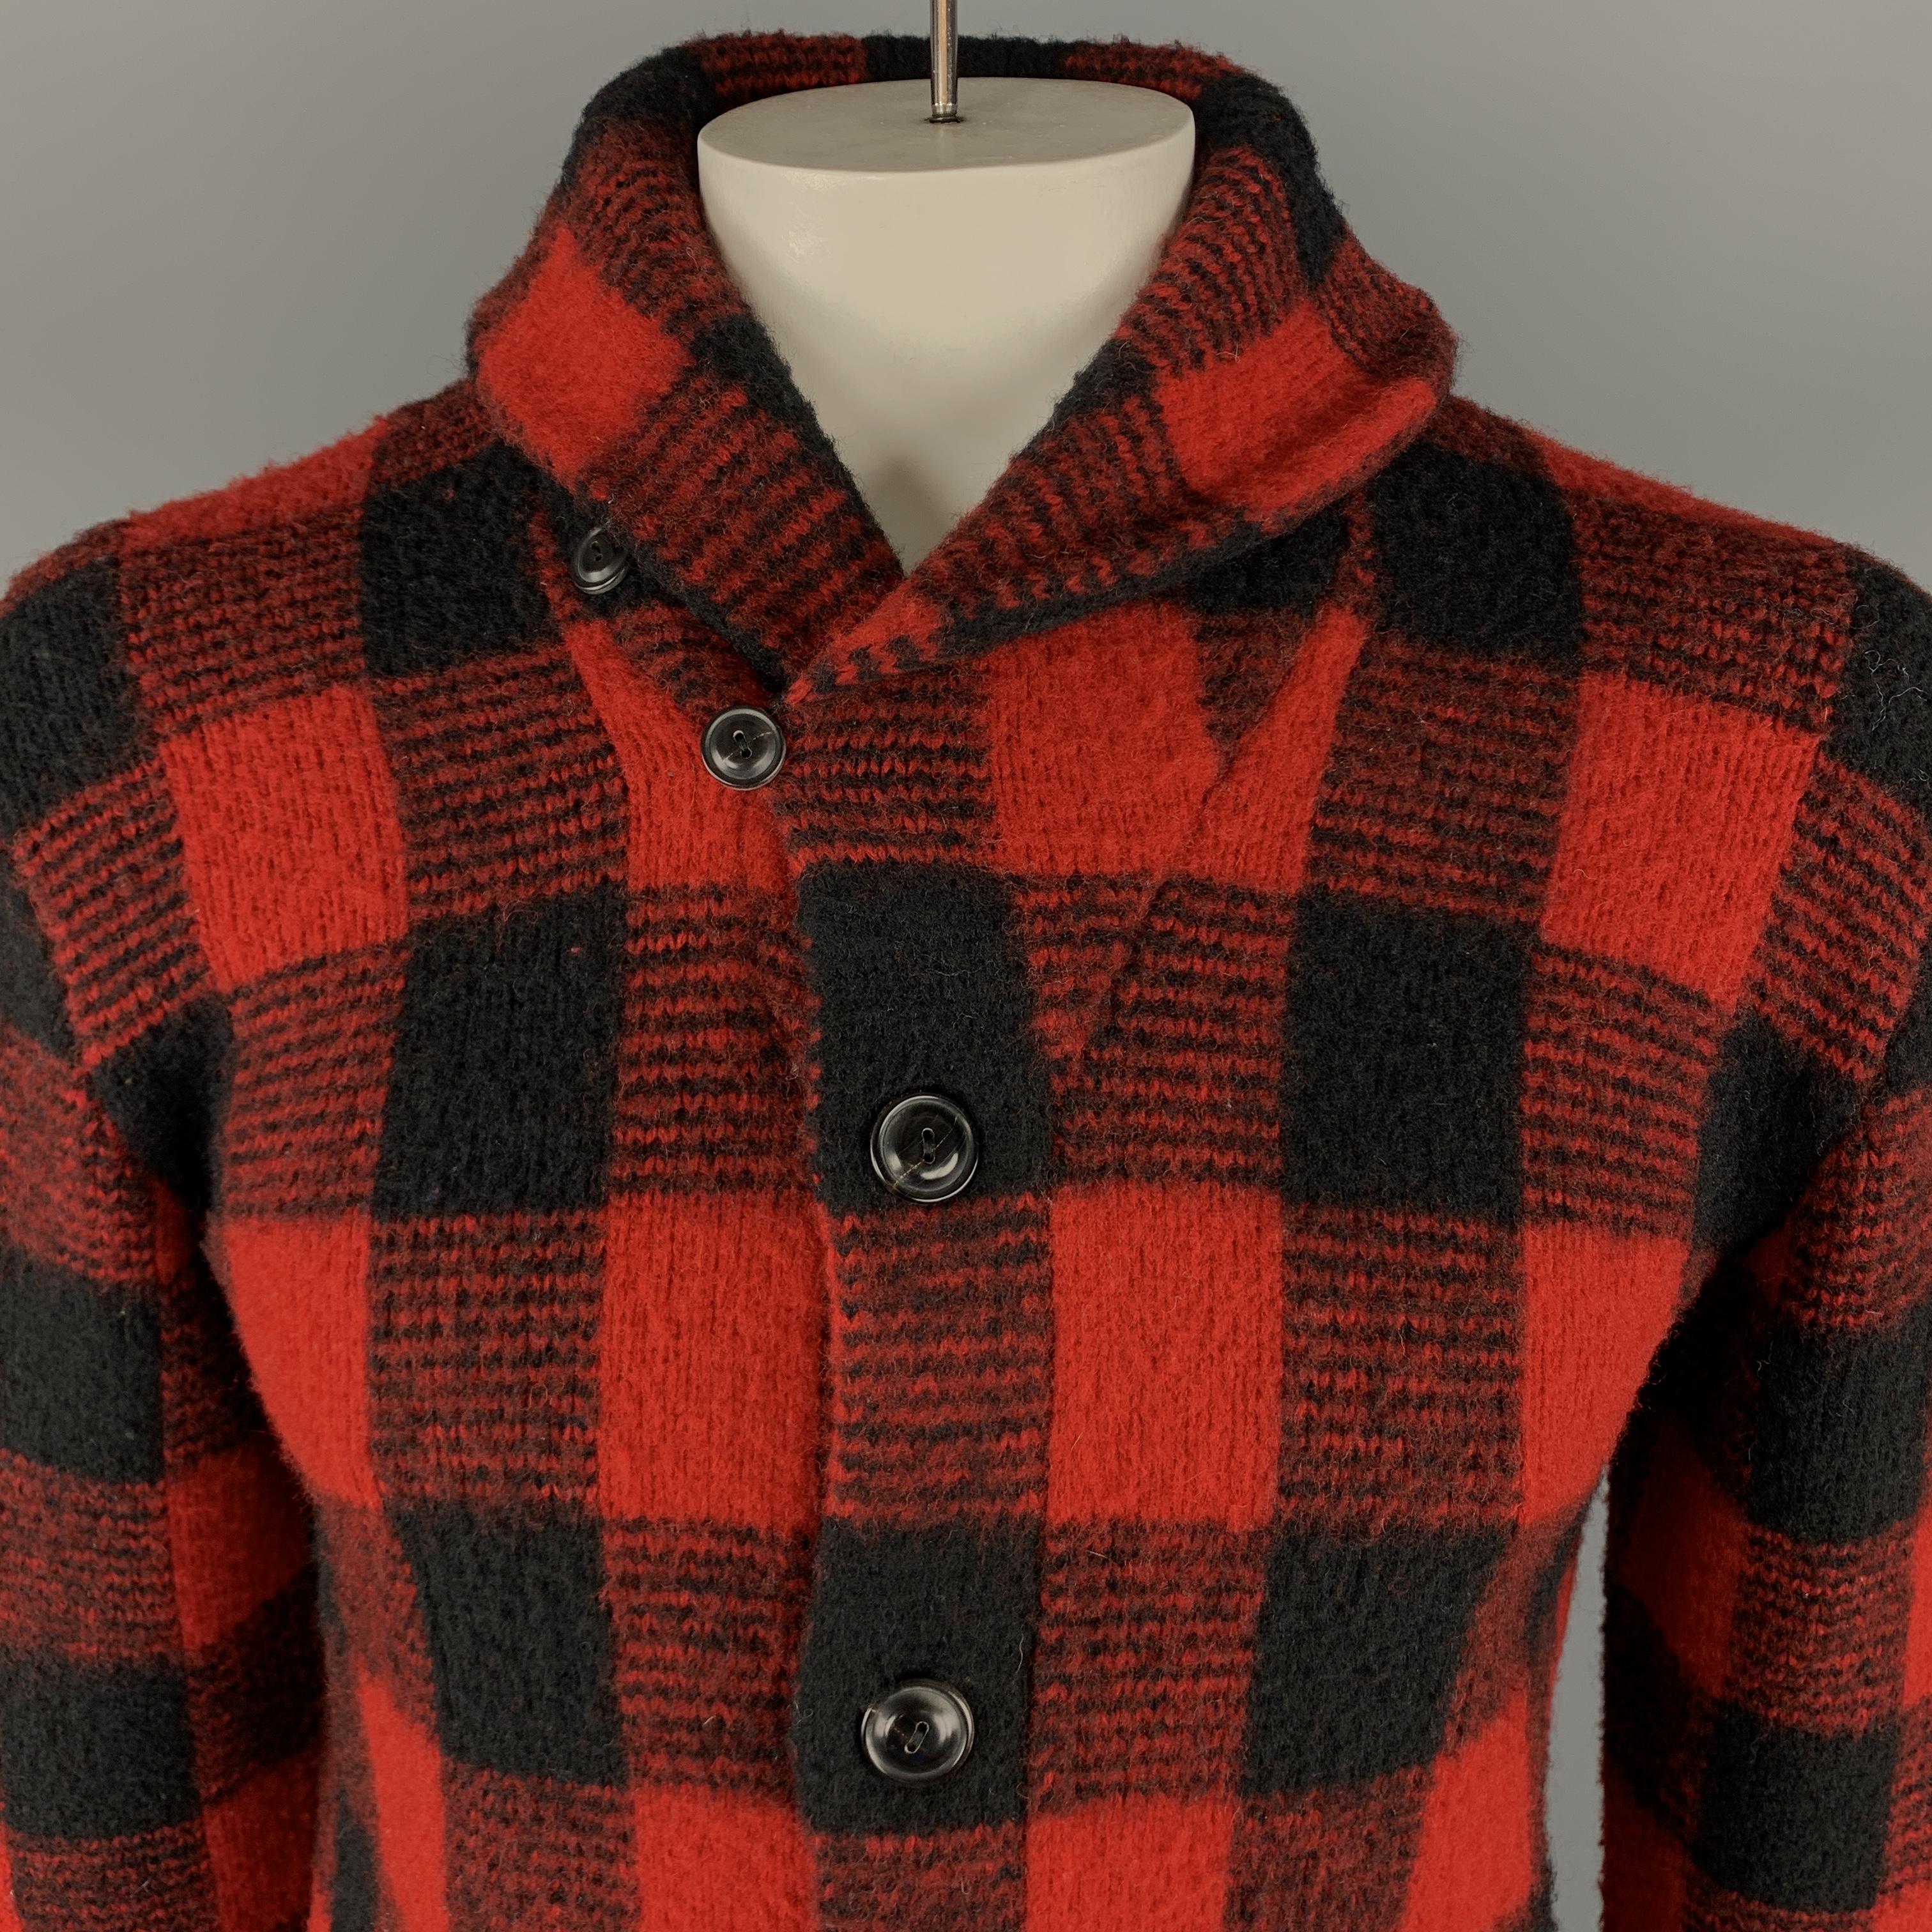 RALPH LAUREN Jacket comes in red and black tones in a buffalo plaid wool material, with a shawl collar, five buttons at closure, patch pockets, and leather elbow patches.
 
Excellent Pre-Owned Condition.
Marked: M
 
Measurements:
 
Shoulder: 19.5